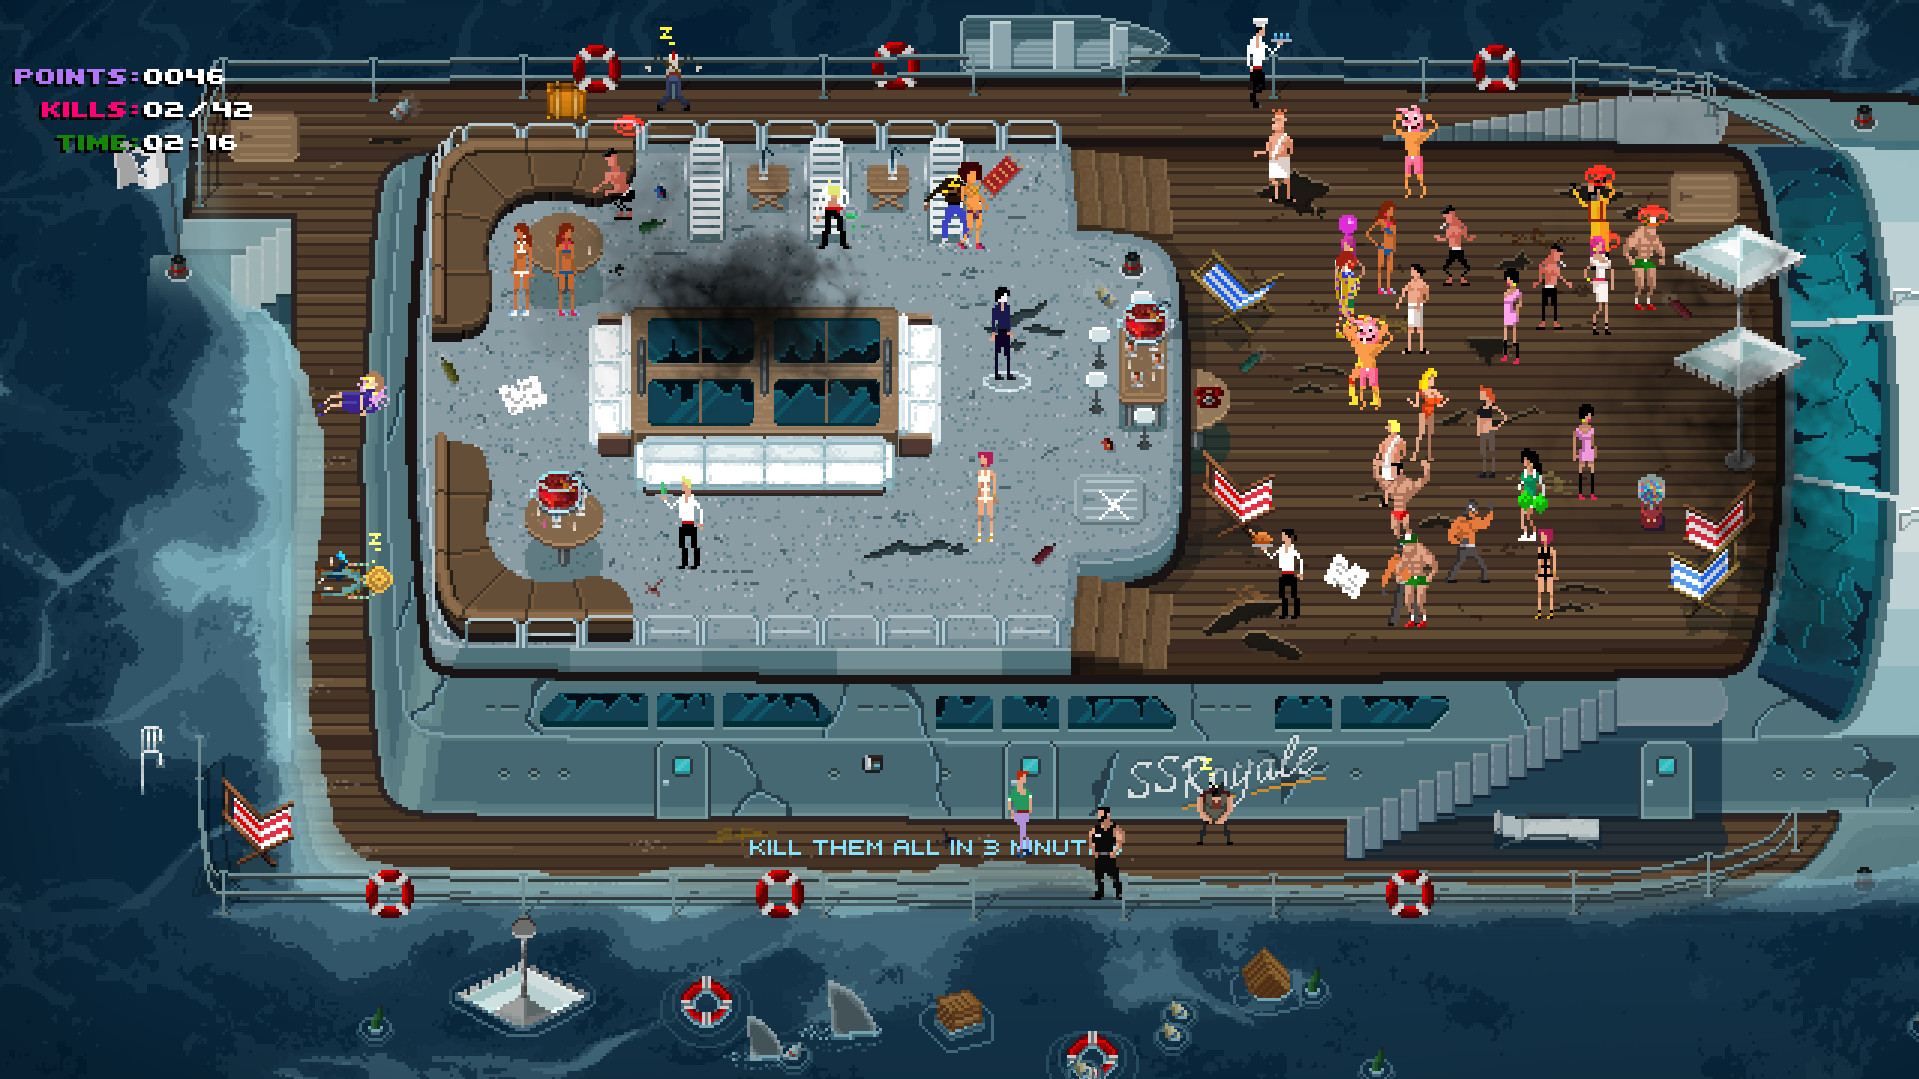 Party Hard, the award-winning game about mass killing, gets an August  release date